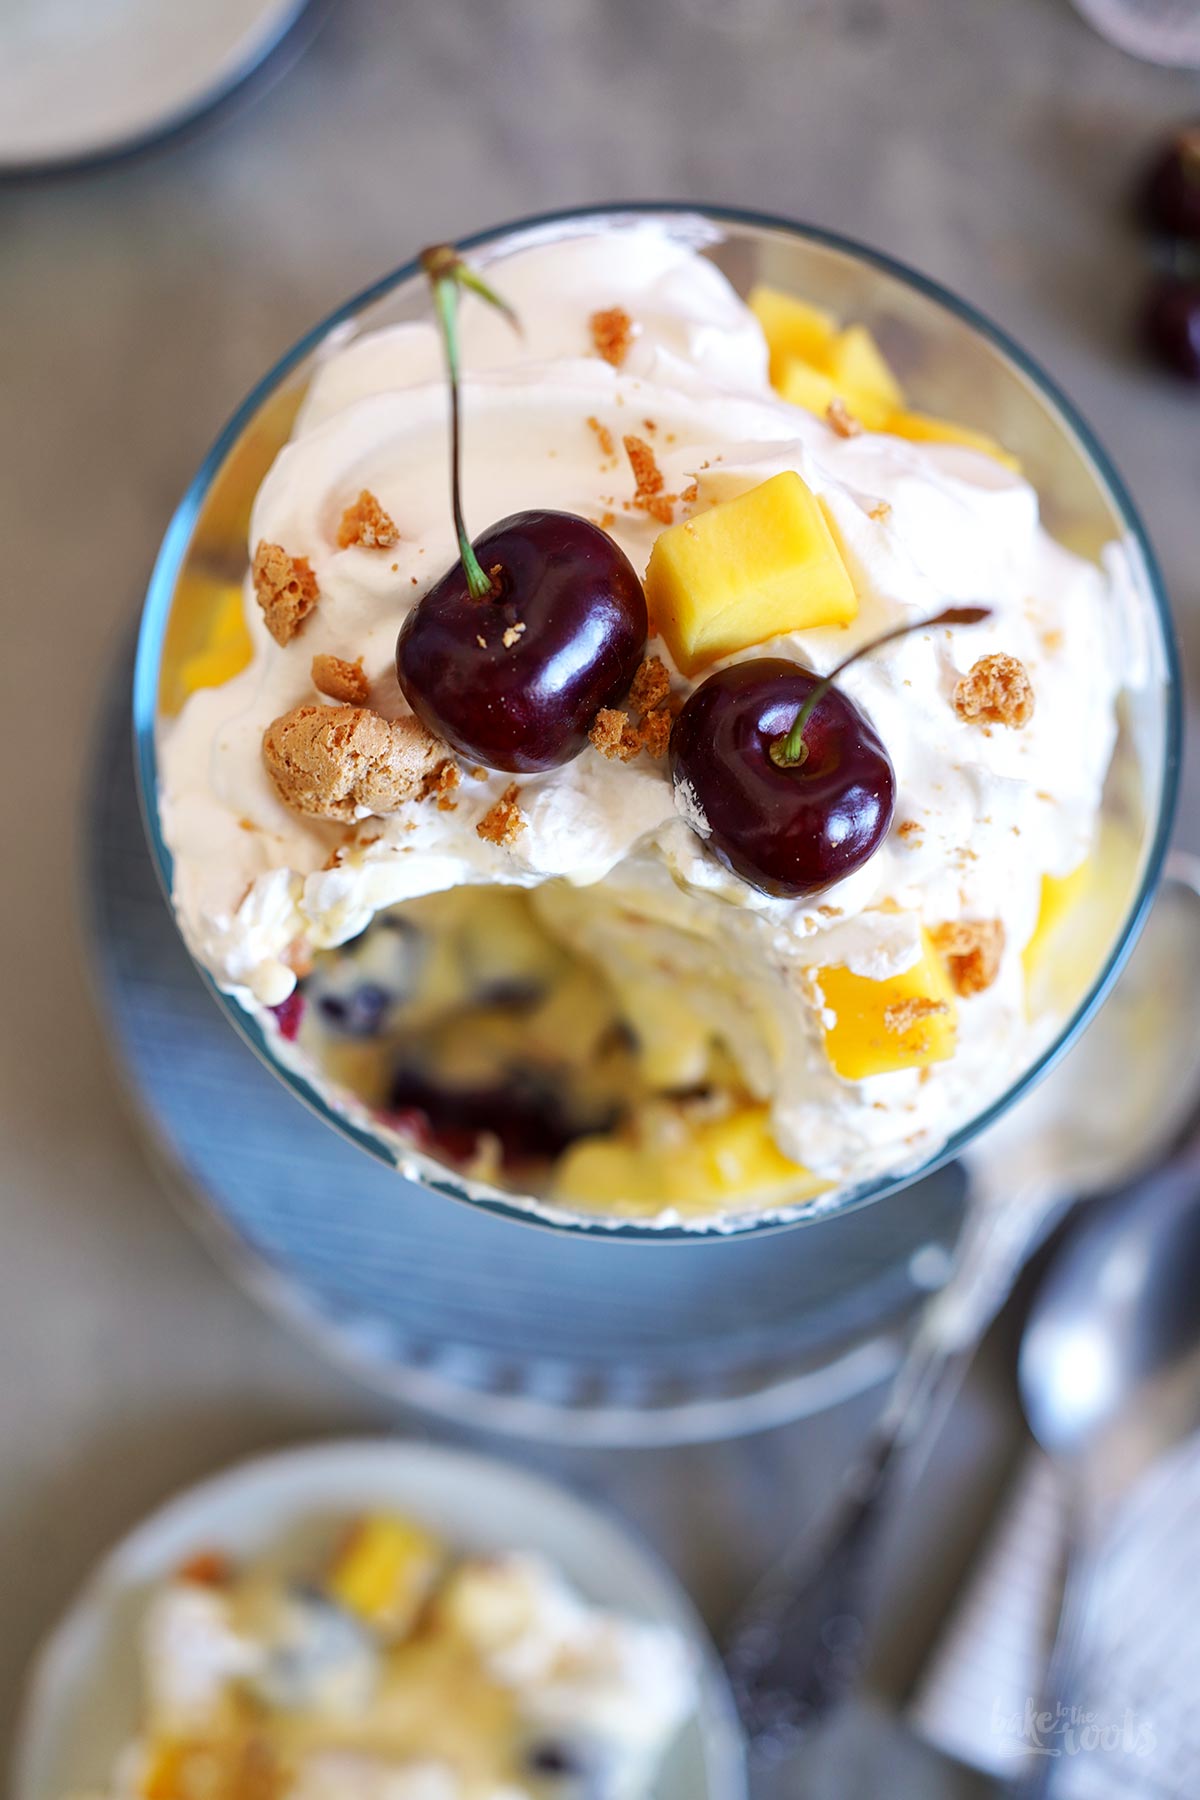 Giant Summer Trifle with Cherries & Mango | Bake to the roots